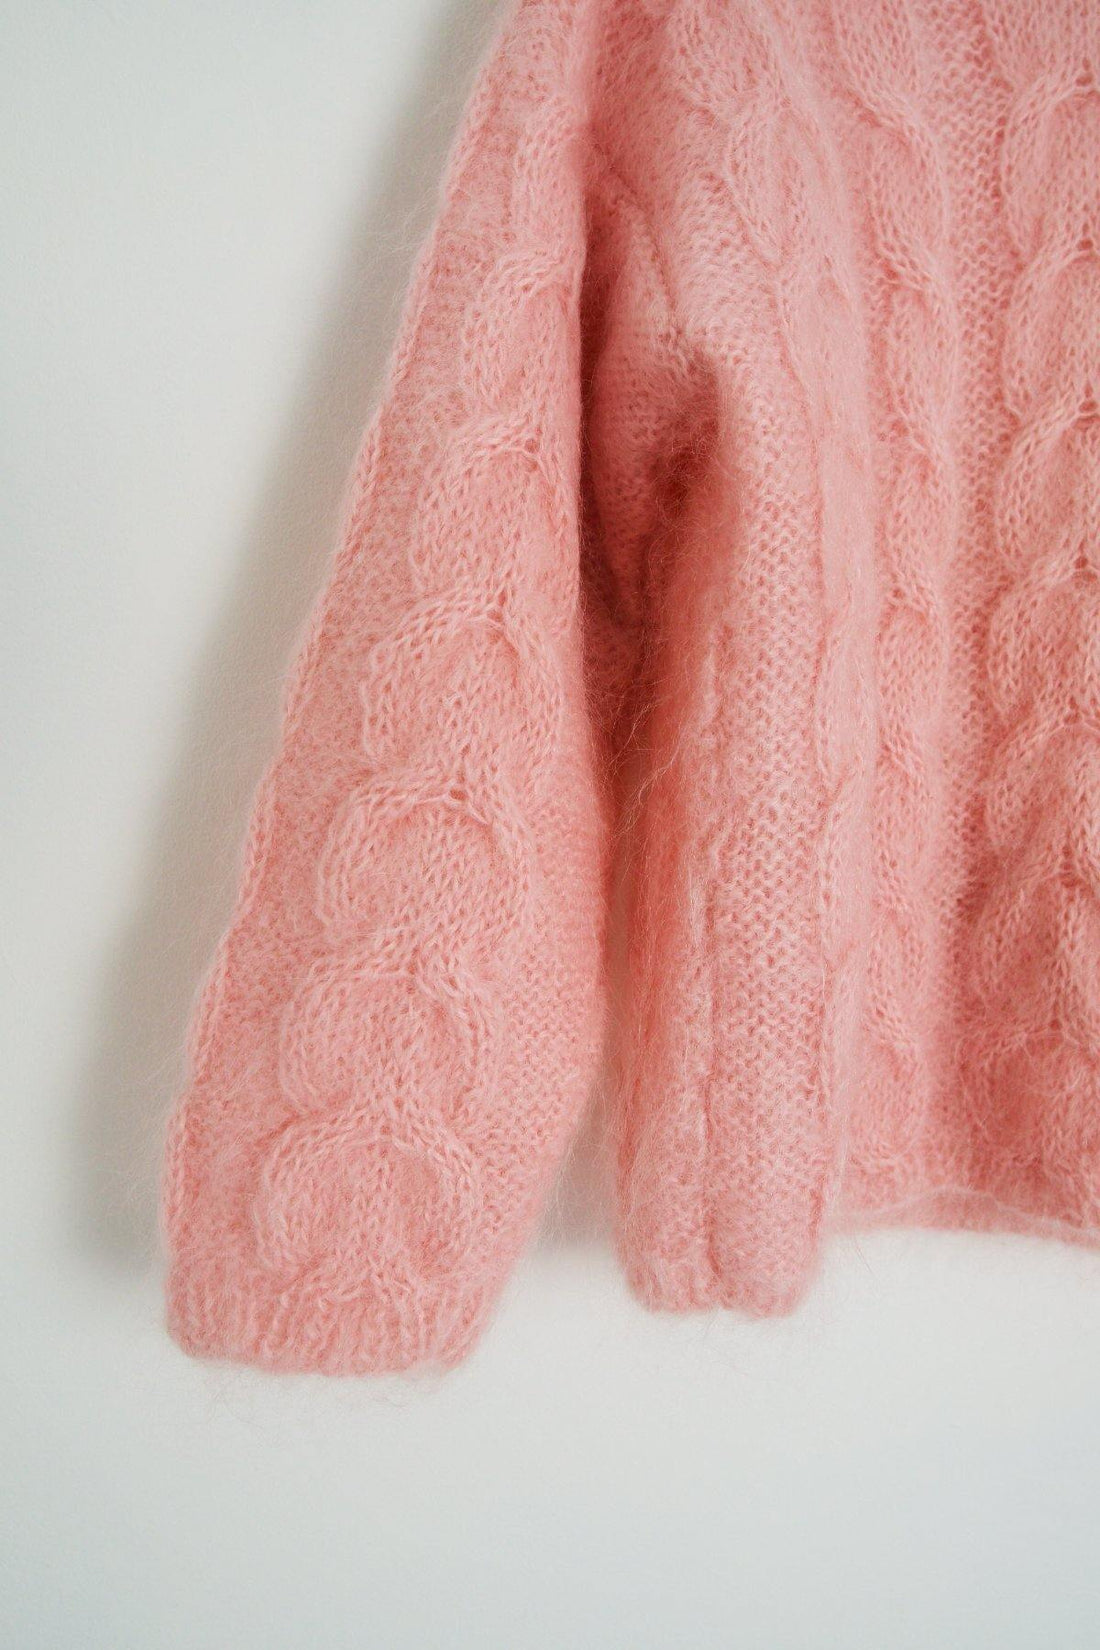 Vintage Pink Fluffy Mohair Sweater-closiTherapi | vinTage